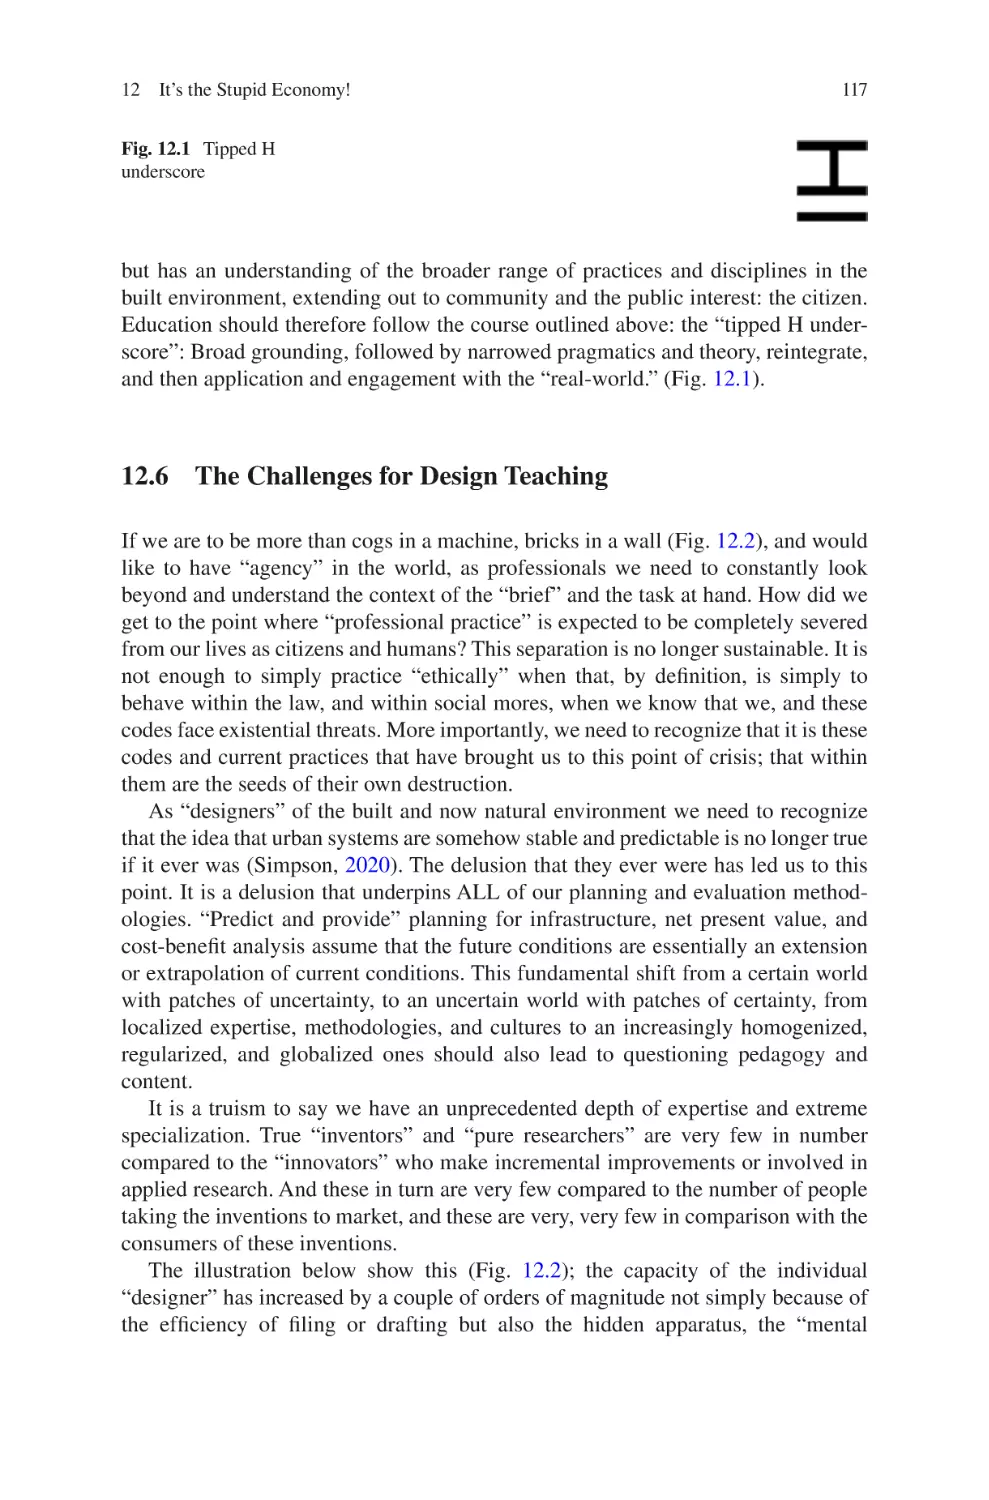 12.6 The Challenges for Design Teaching